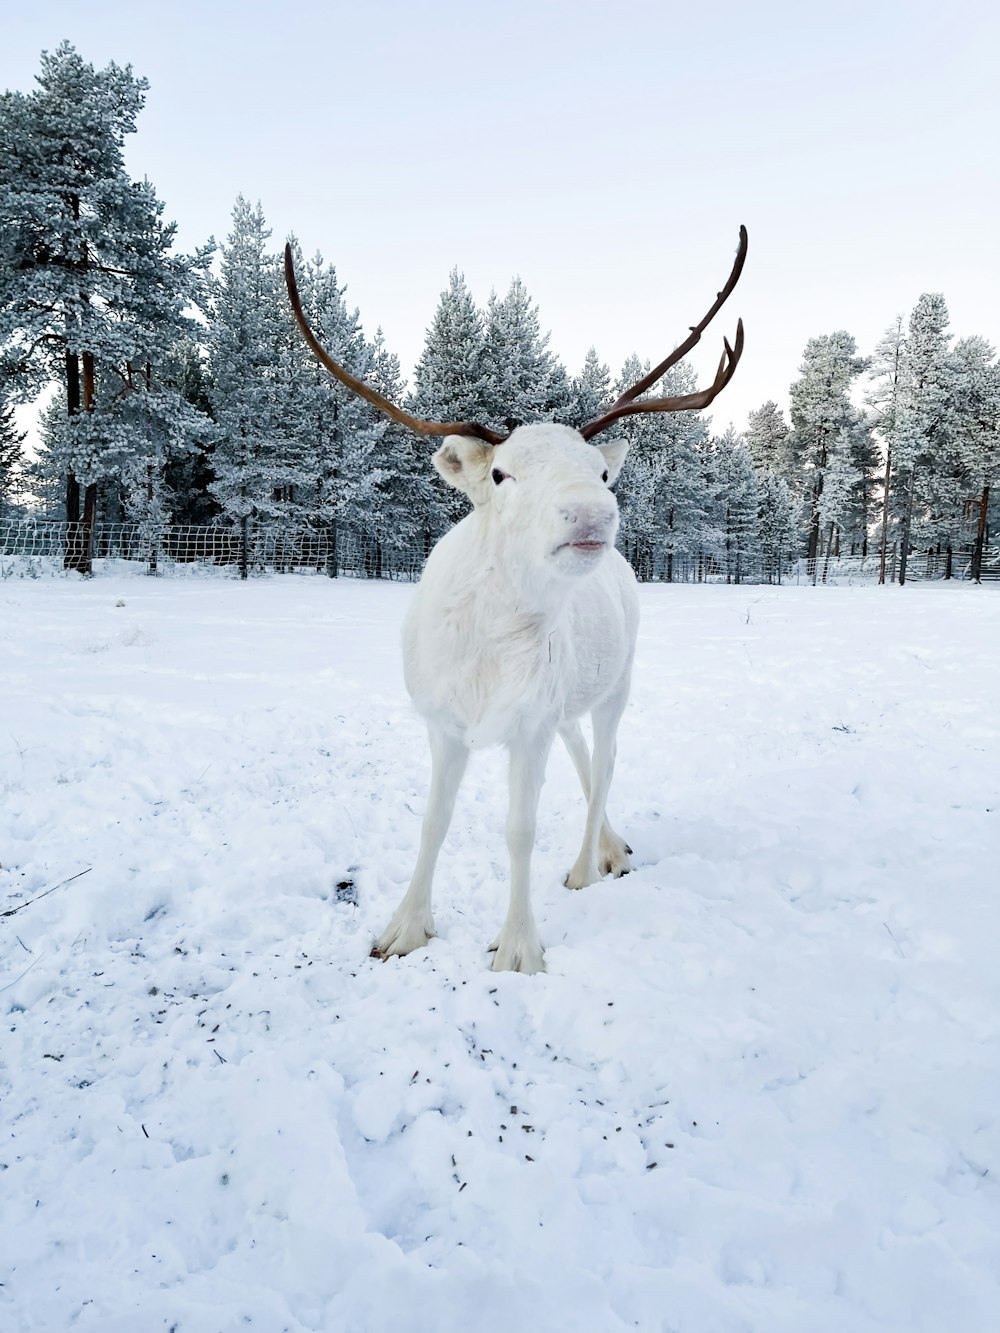 a white animal with large horns standing in the snow